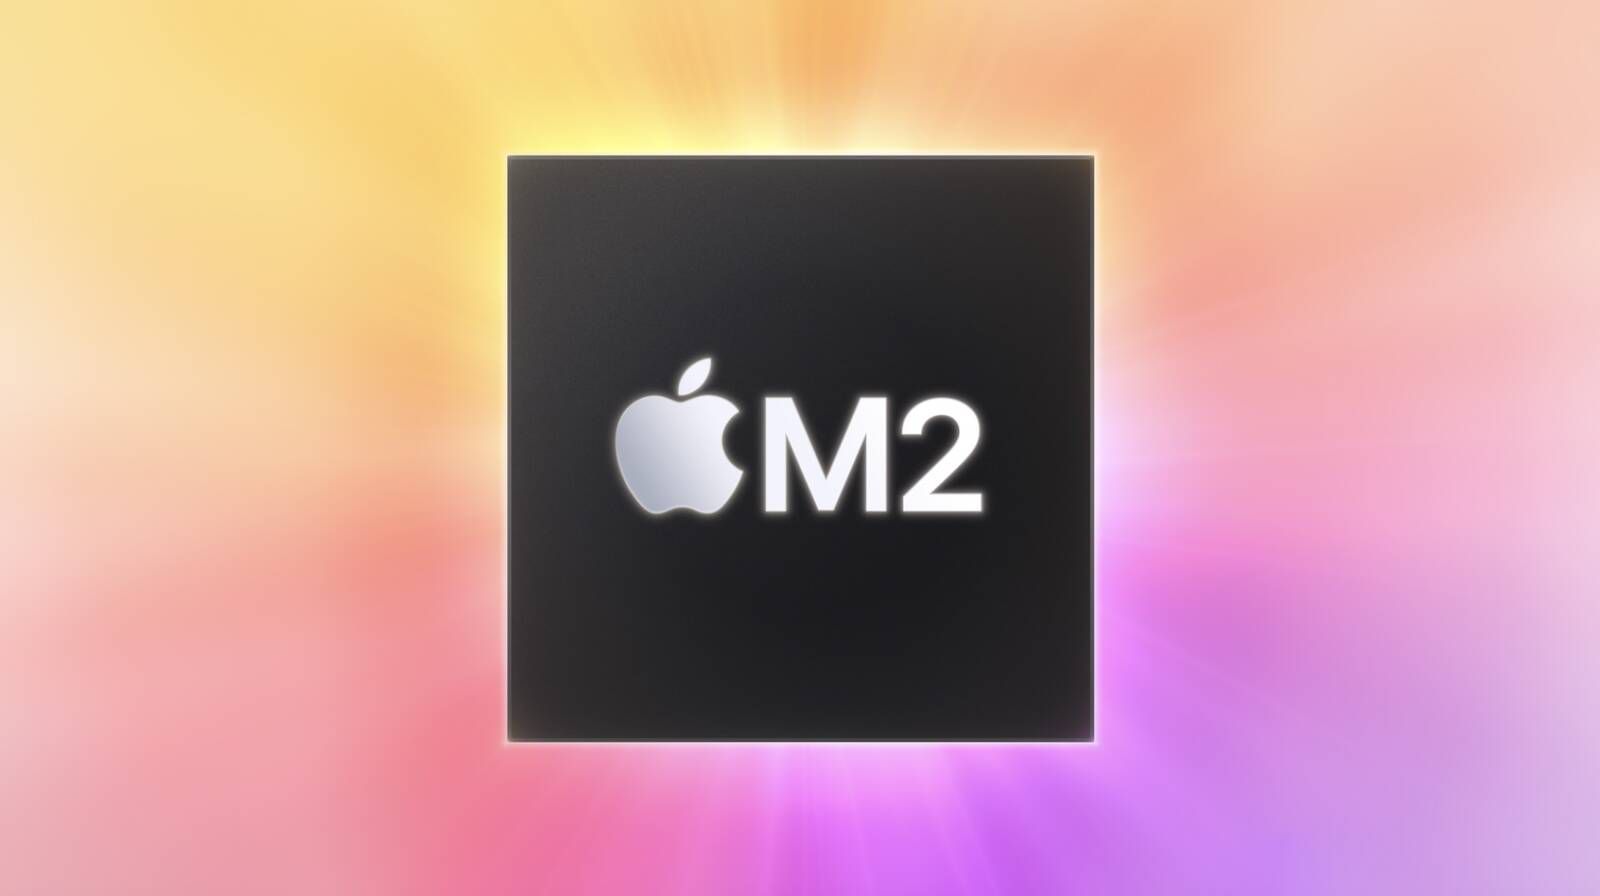 Kuo: New 15-Inch MacBook With M2 and M2 Pro Chip Options Planned for 2023